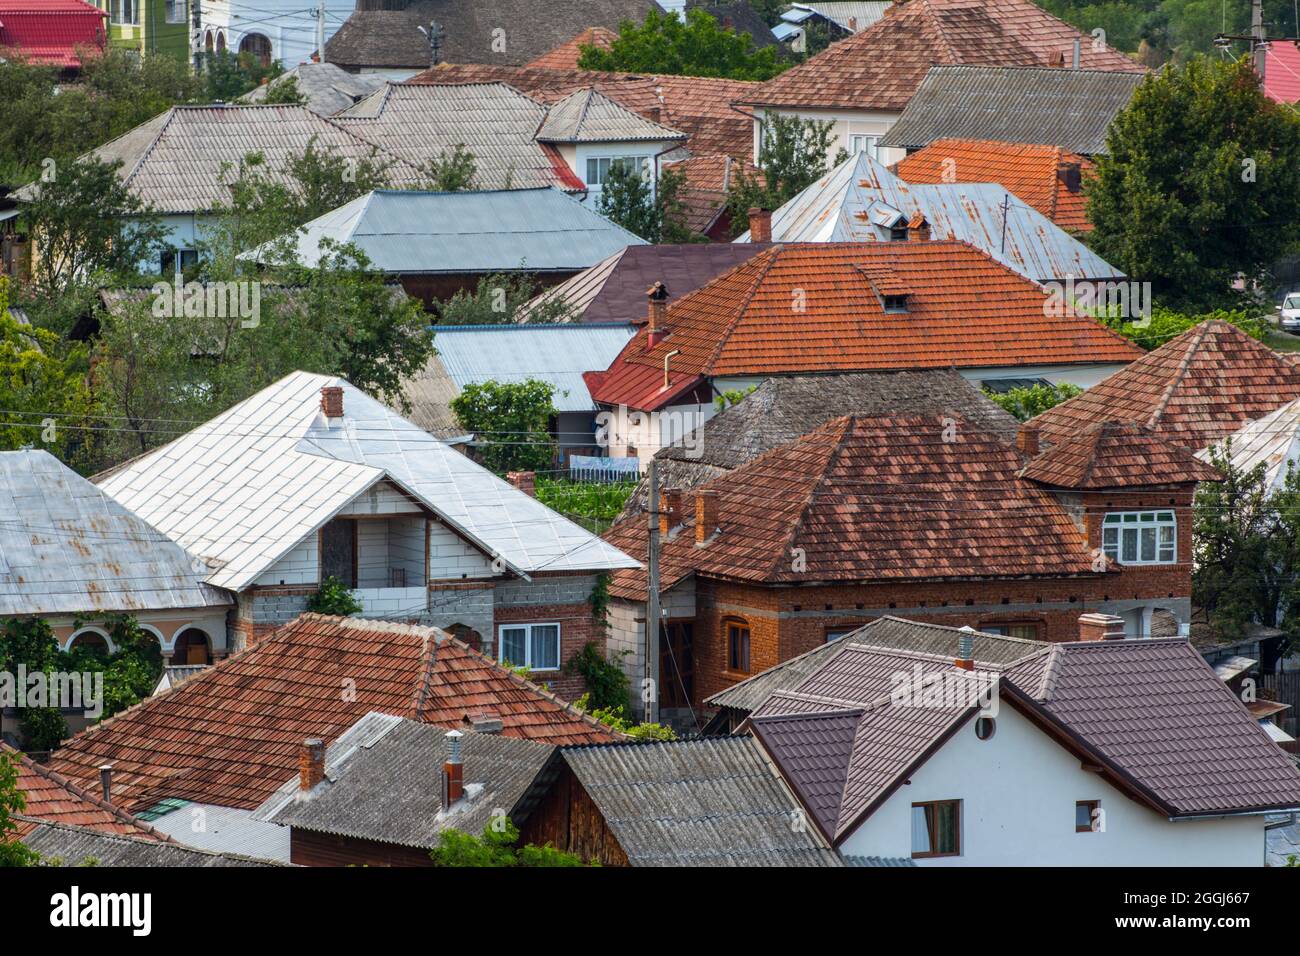 Roofs made of various materials, in a Romanian village. Stock Photo